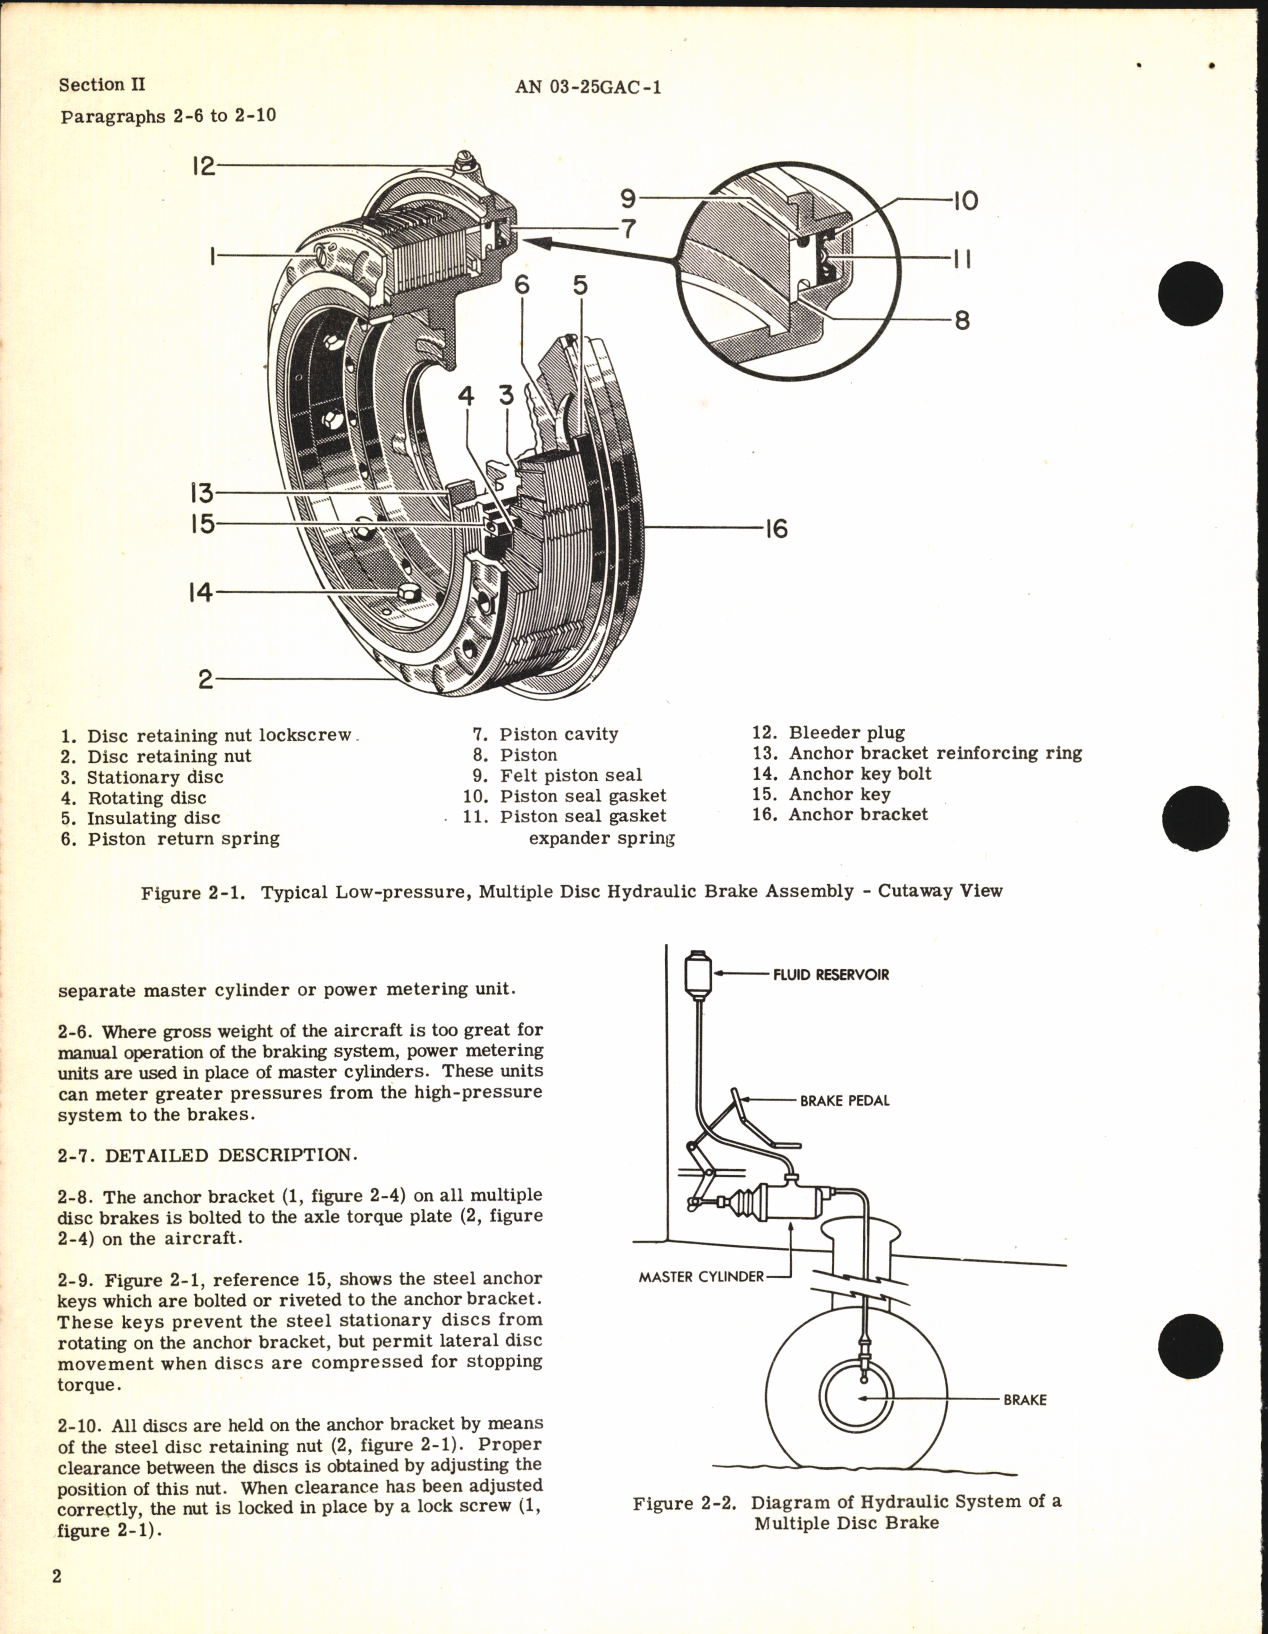 Sample page 6 from AirCorps Library document: Overhaul Instructions for Multiple Disc Brakes (Goodyear)